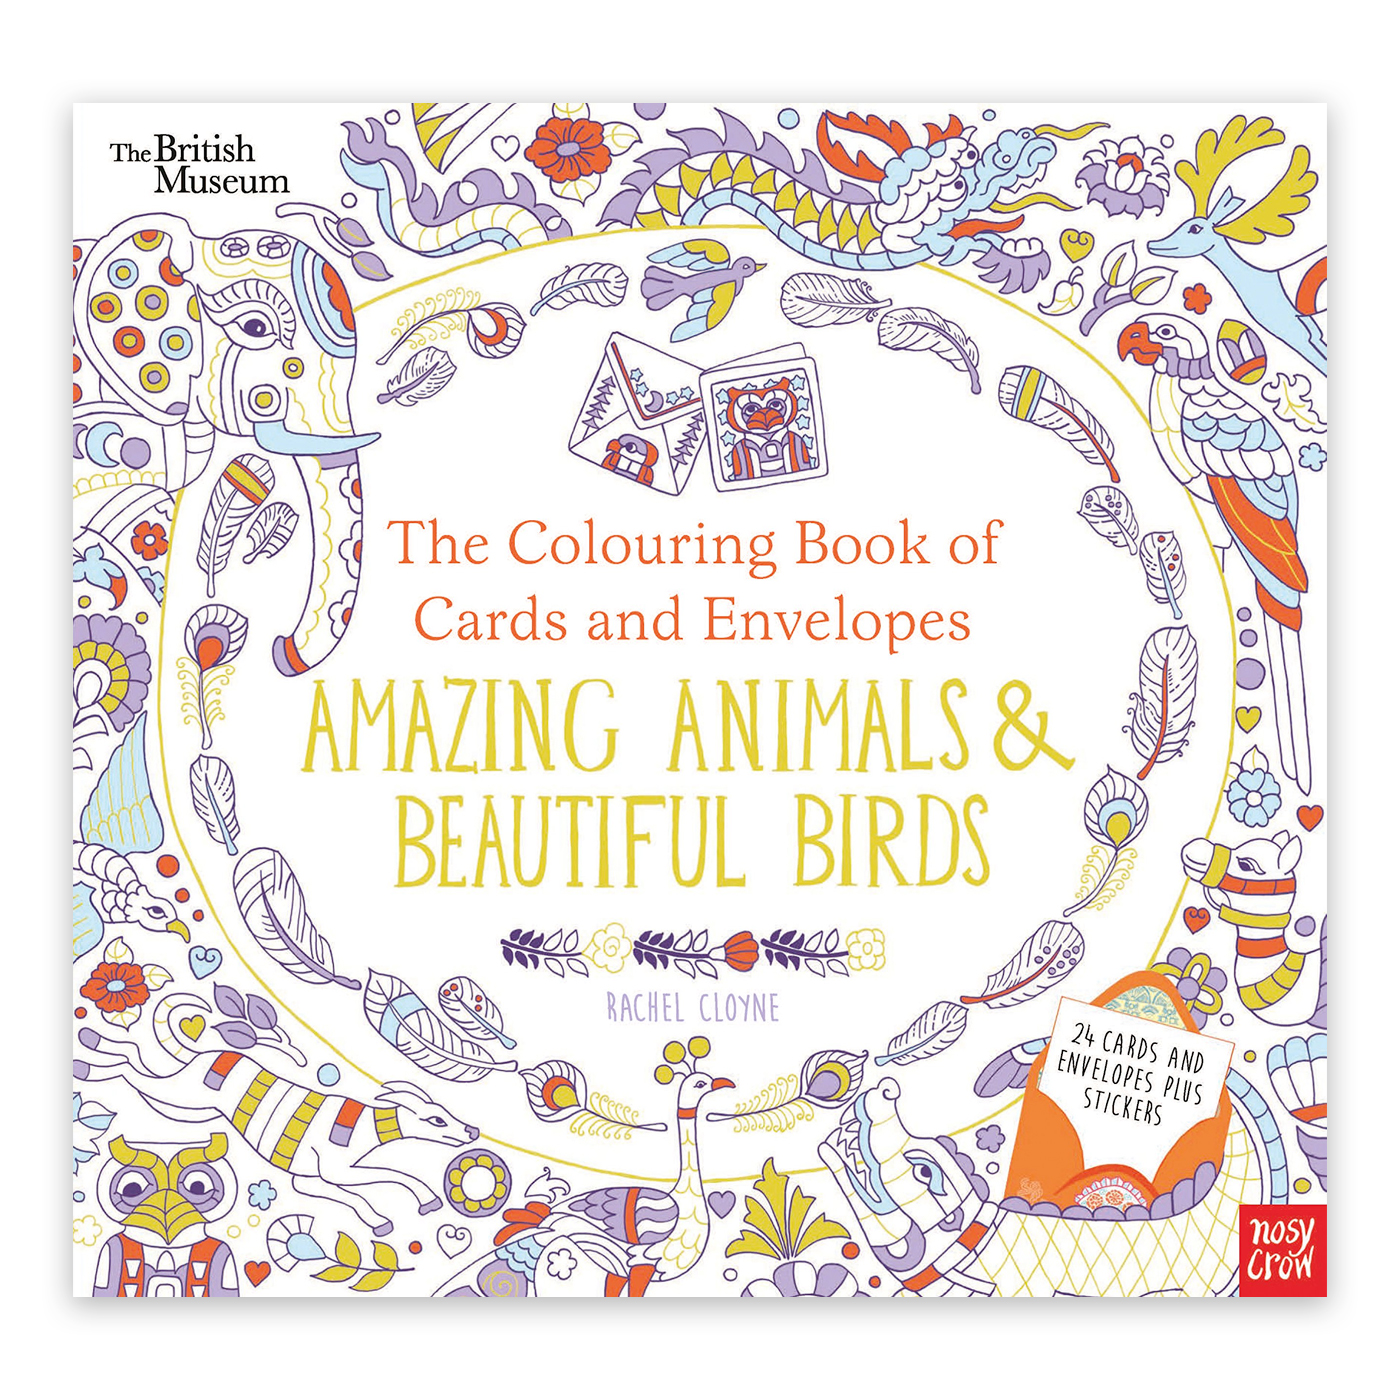  The Colouring Book of Cards and Envelopes: Amazing Animals & Beatiful Birds